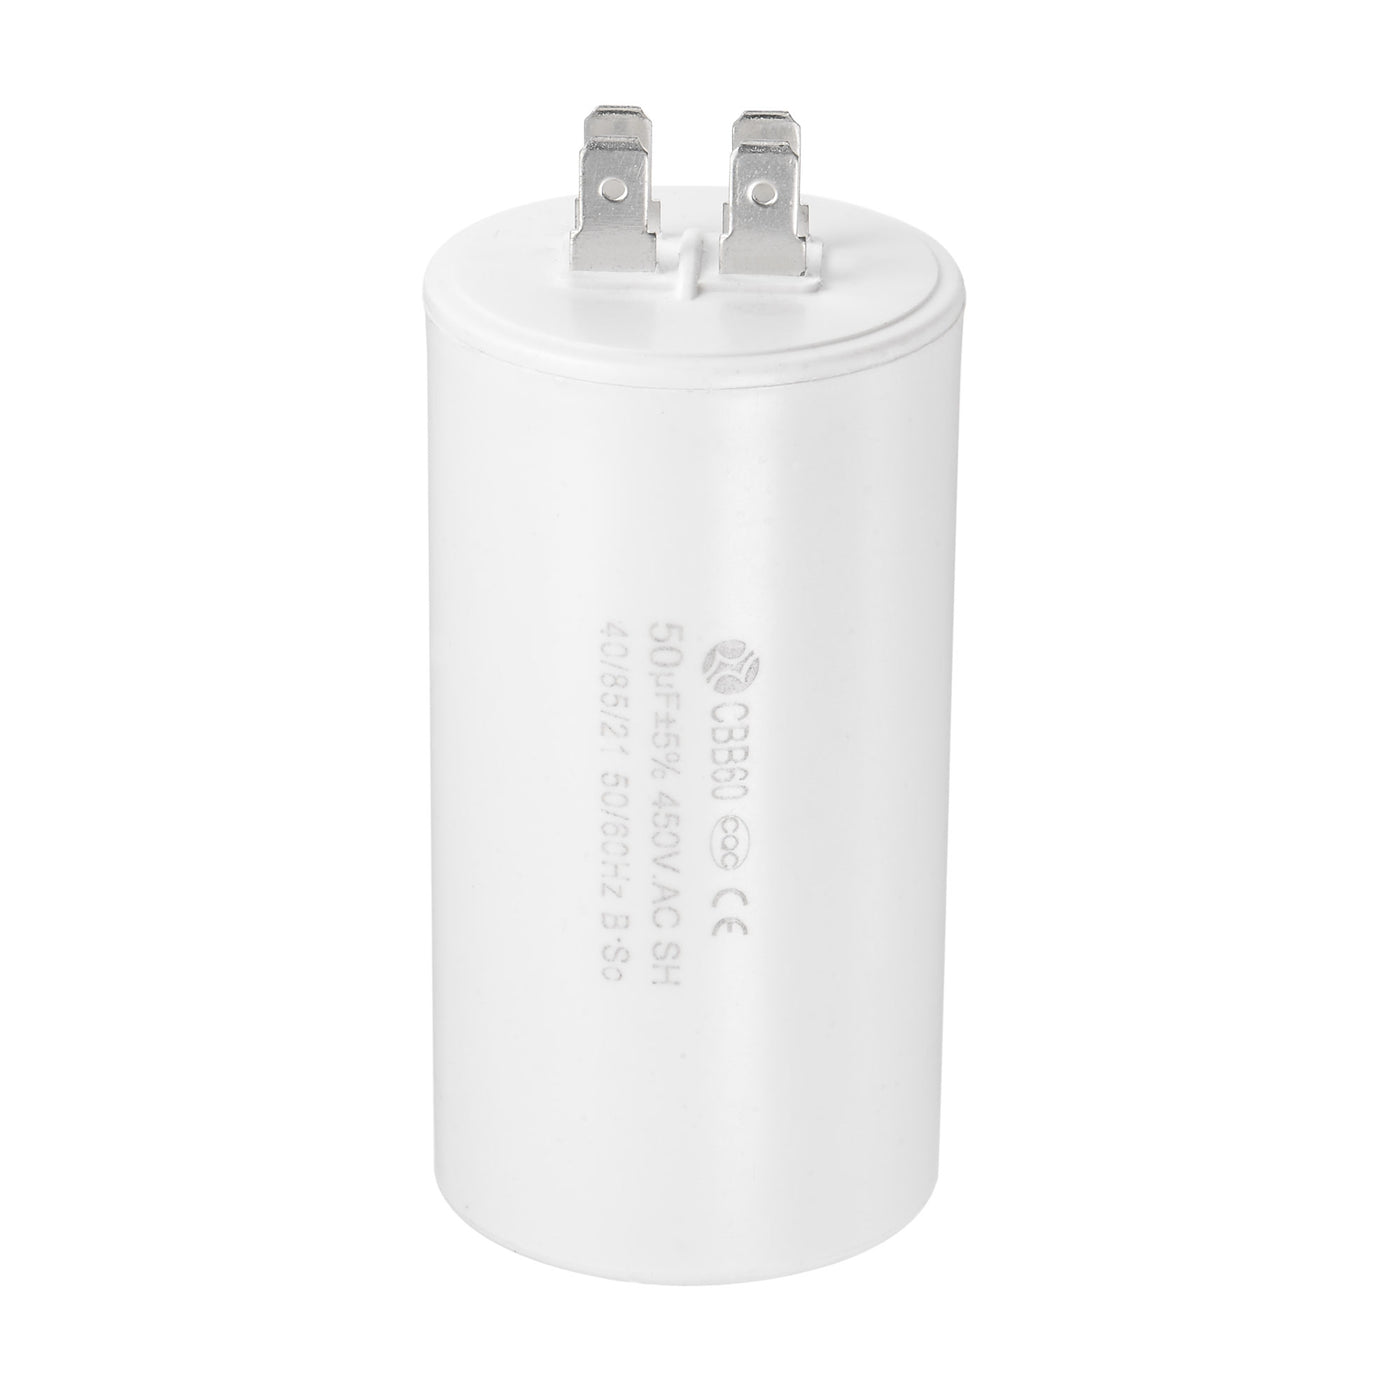 uxcell Uxcell CBB60 Run Capacitor 50uF 450V AC Double Insert 50/60Hz Cylinder 94x49mm White for Air Compressor Water Pump Motor